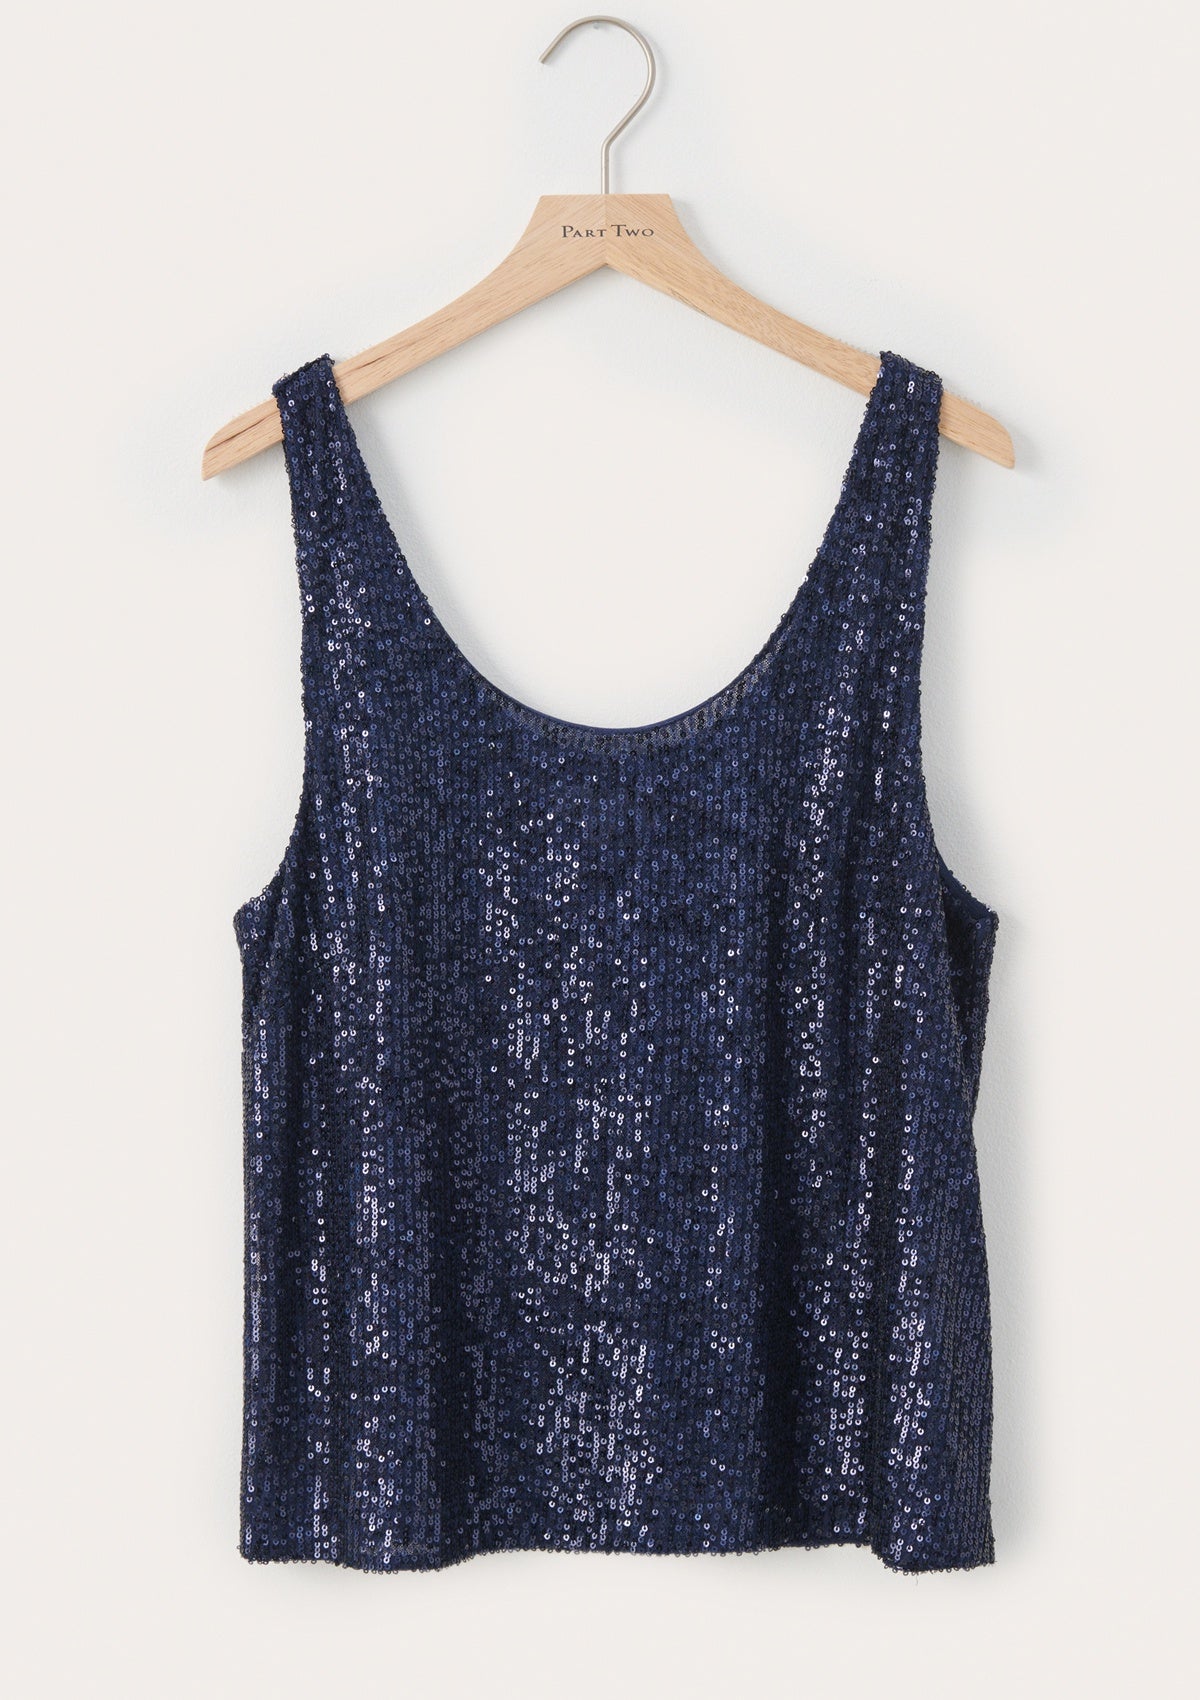 Part Two Tamana Sequin Vest Top Midnight Sail Blue